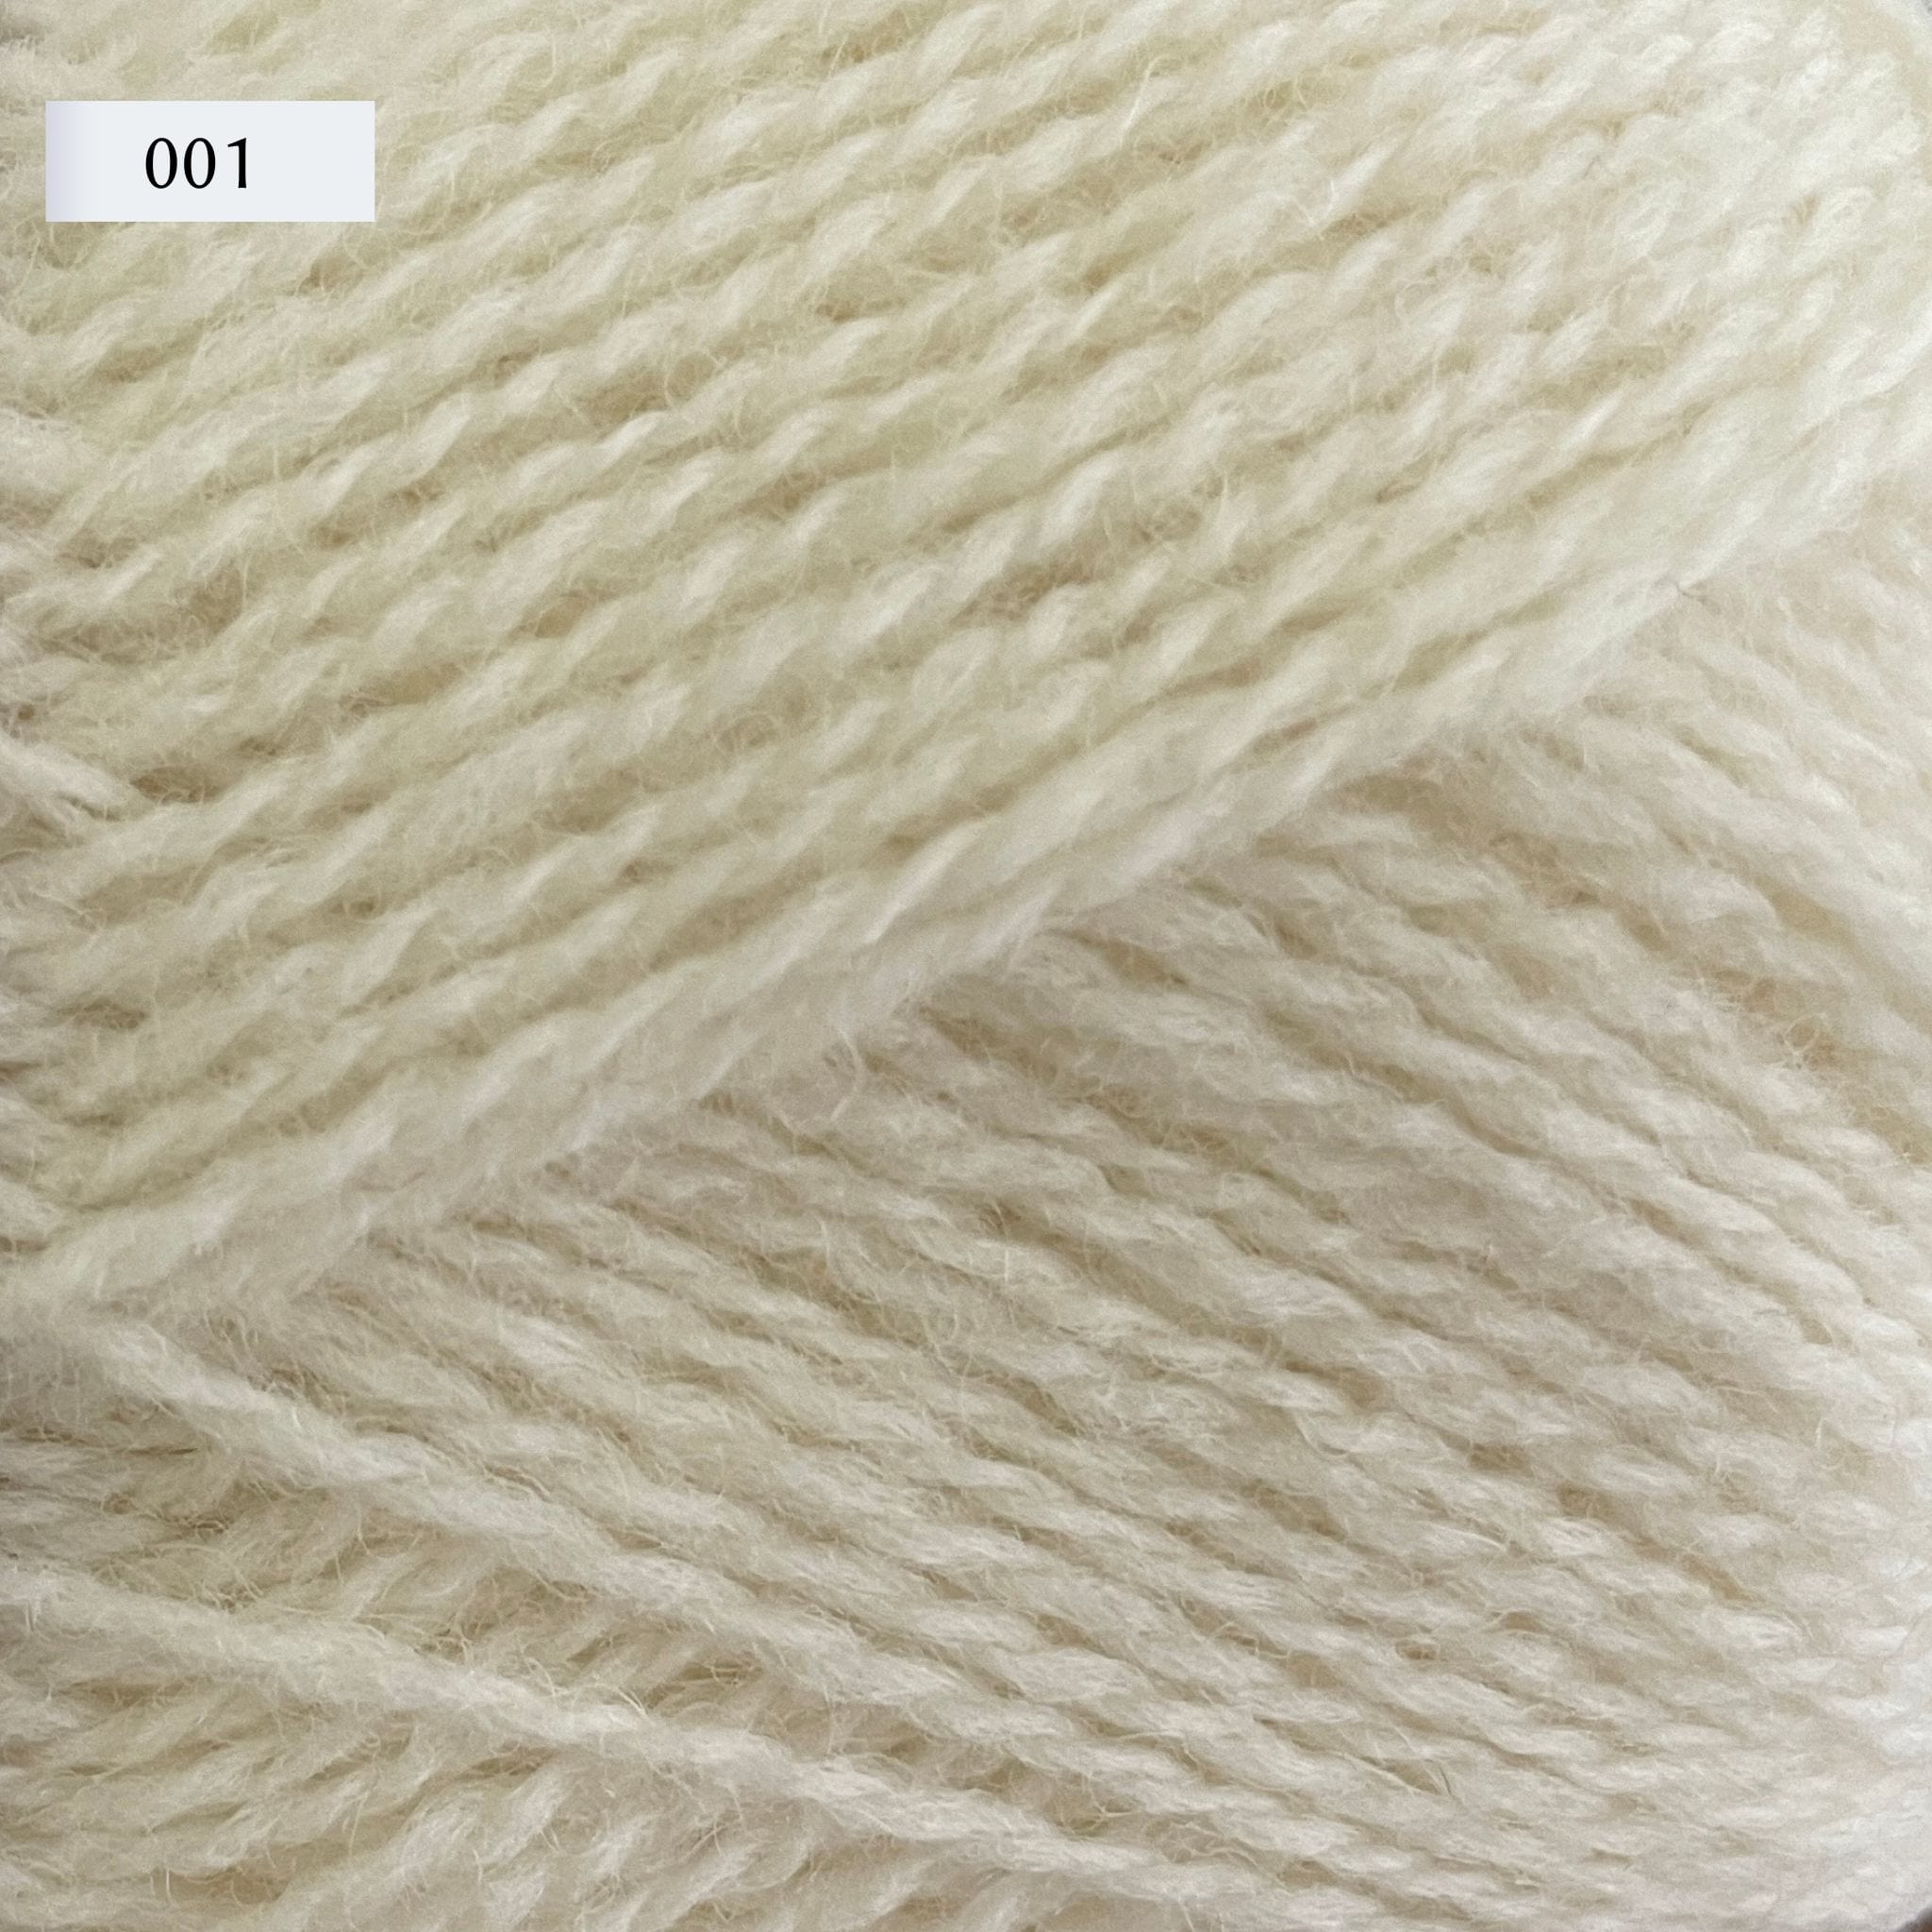 Jamieson & Smith 2ply Jumper Weight, light fingering weight yarn, in color 001, pure white